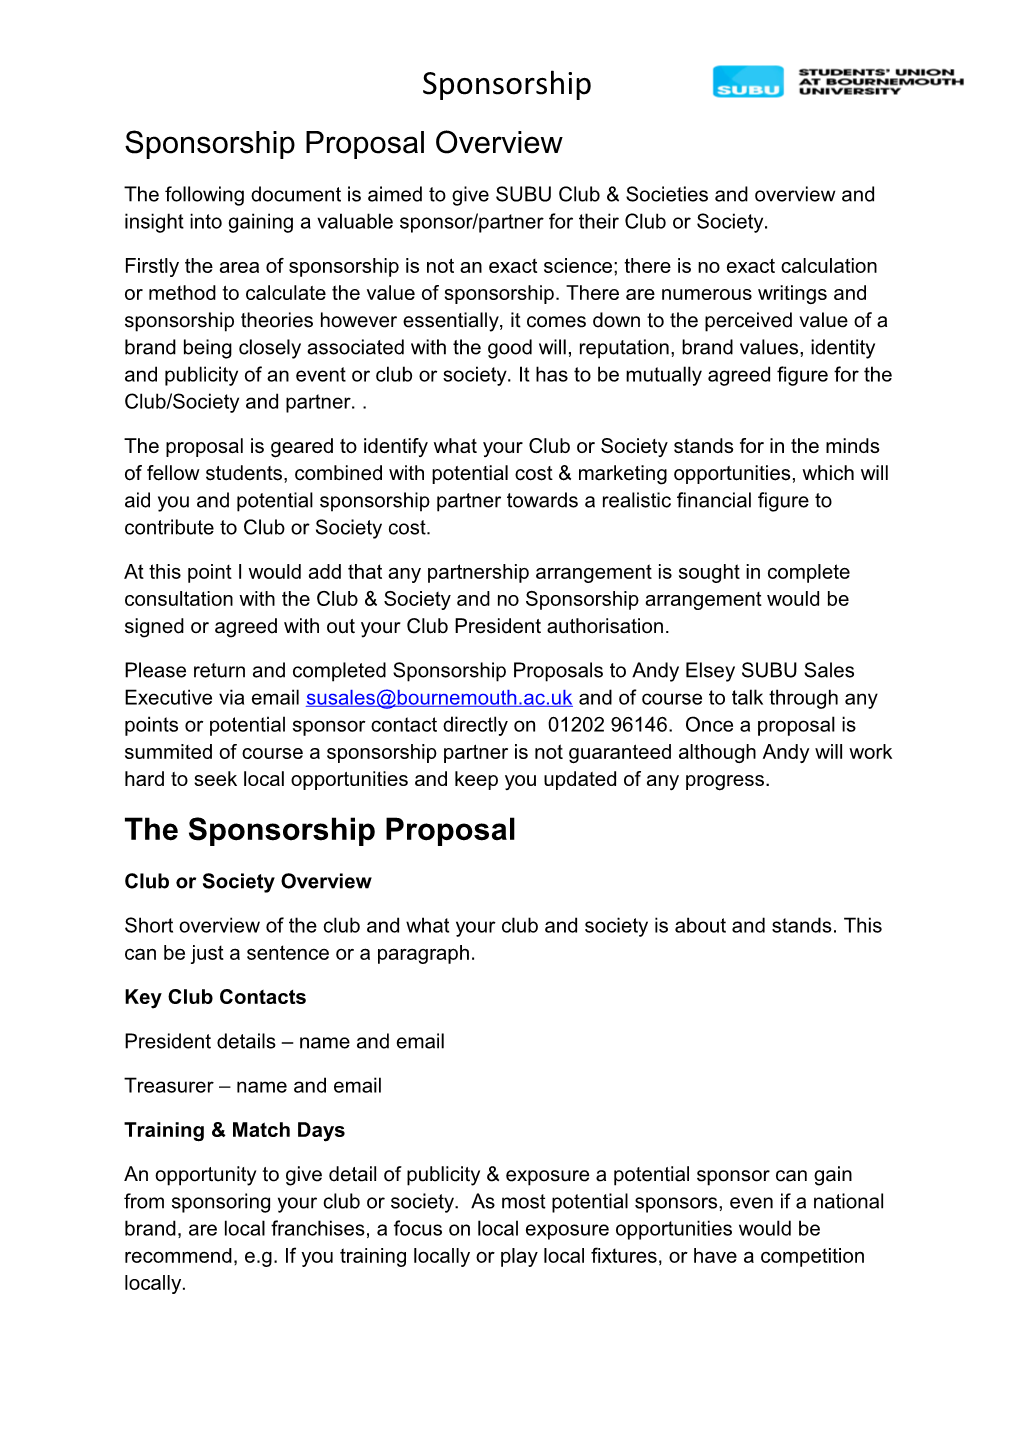 Sponsorship Proposal Overview s1